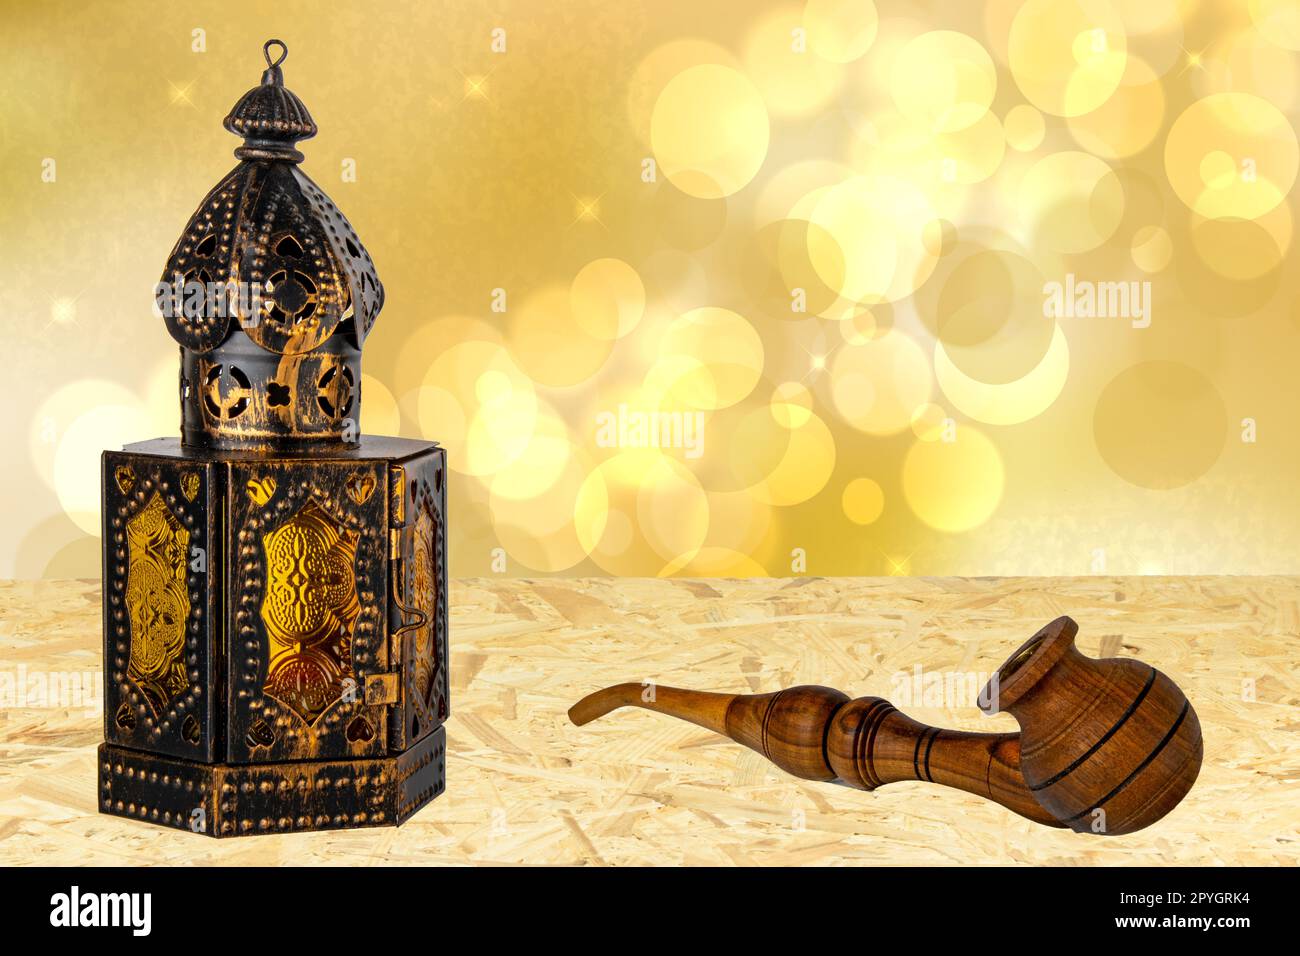 Old oriental or arabic metallic lantern and a handmade wooden tobacco pipe on table over abstract golden stars background. Ramadan Kareem template. Card design. Stock Photo